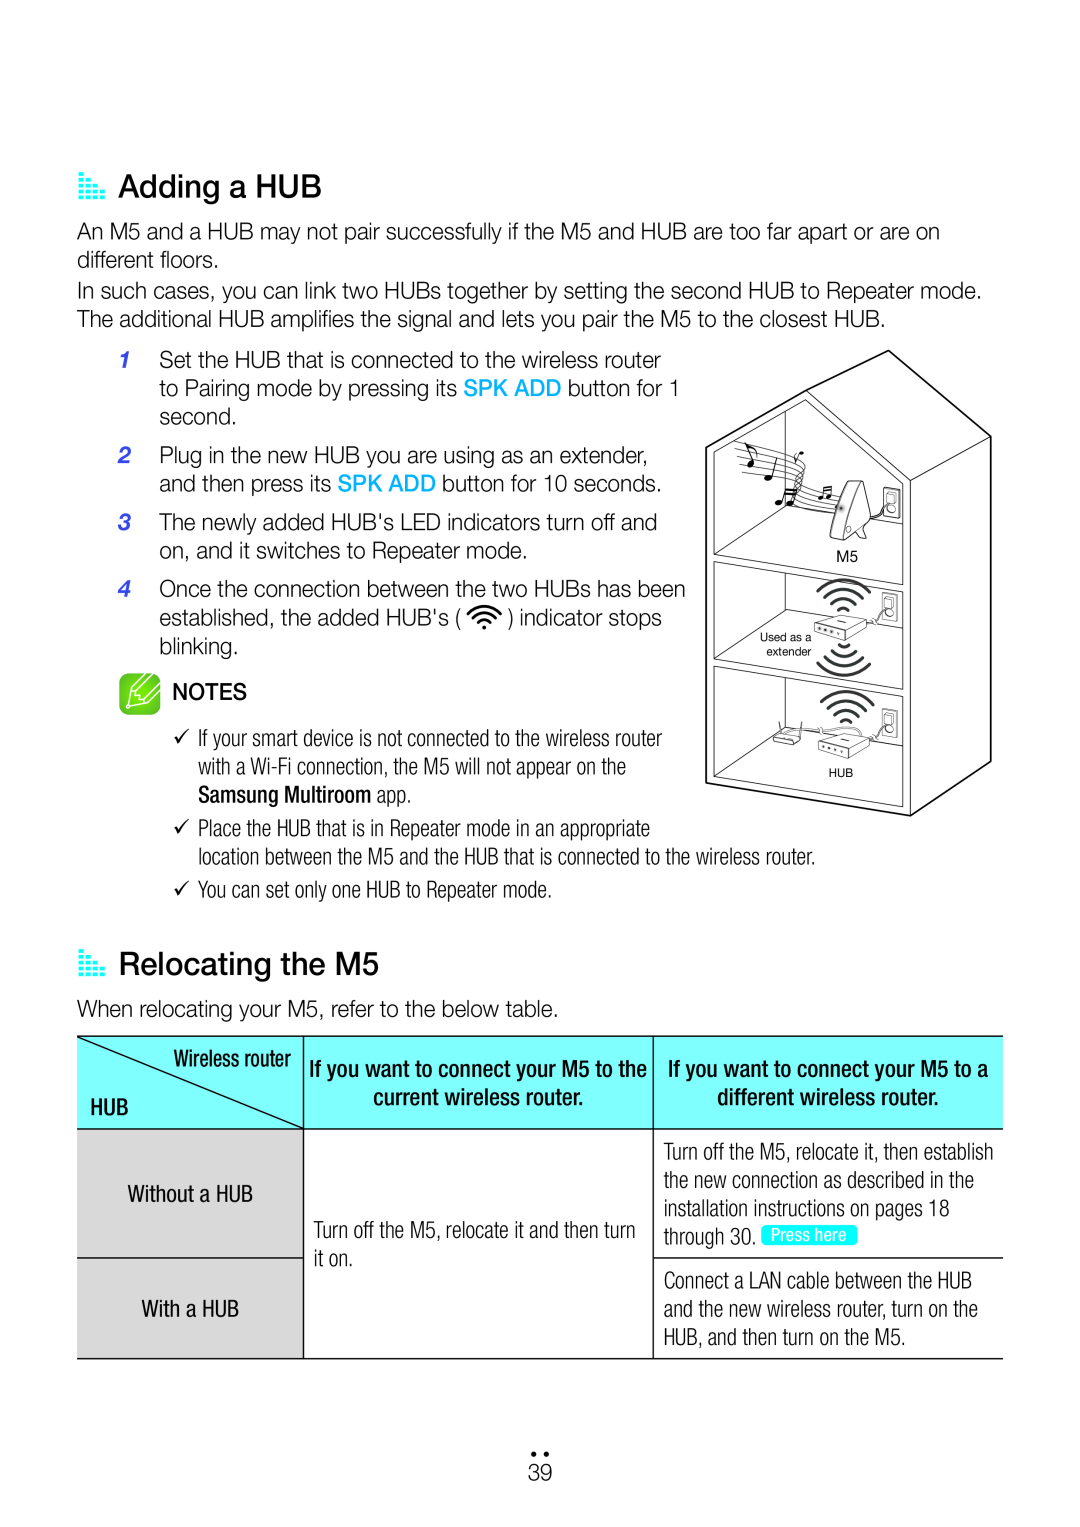 Samsung user manual AA Adding a HUB, AA Relocating the M5 